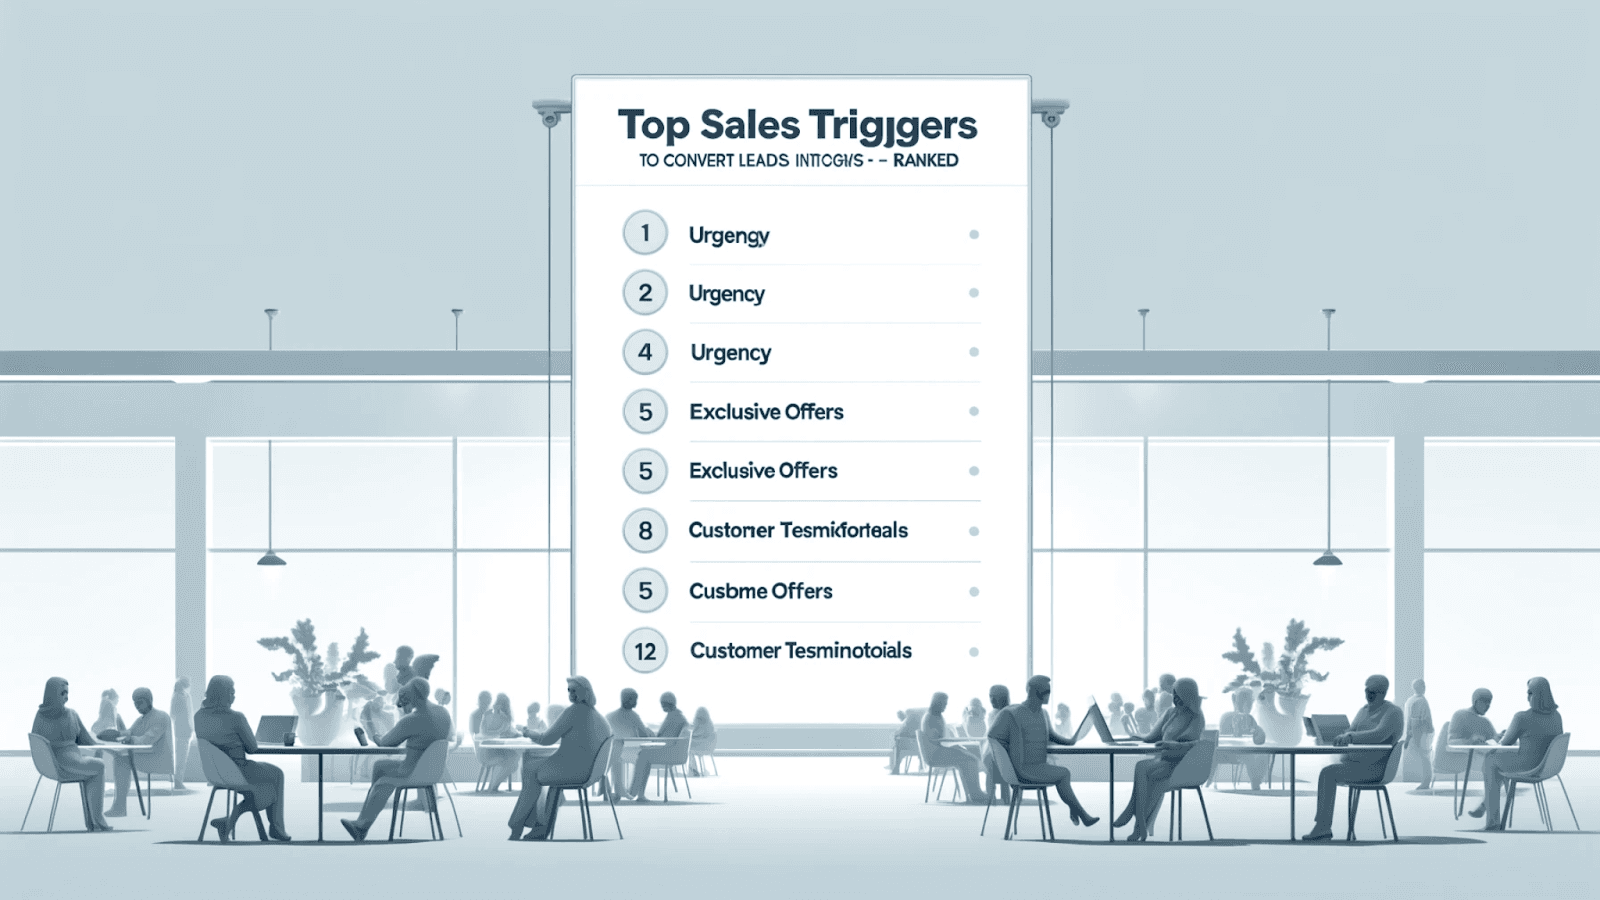 Top Sales Triggers to Convert Leads into Customers - RANKED